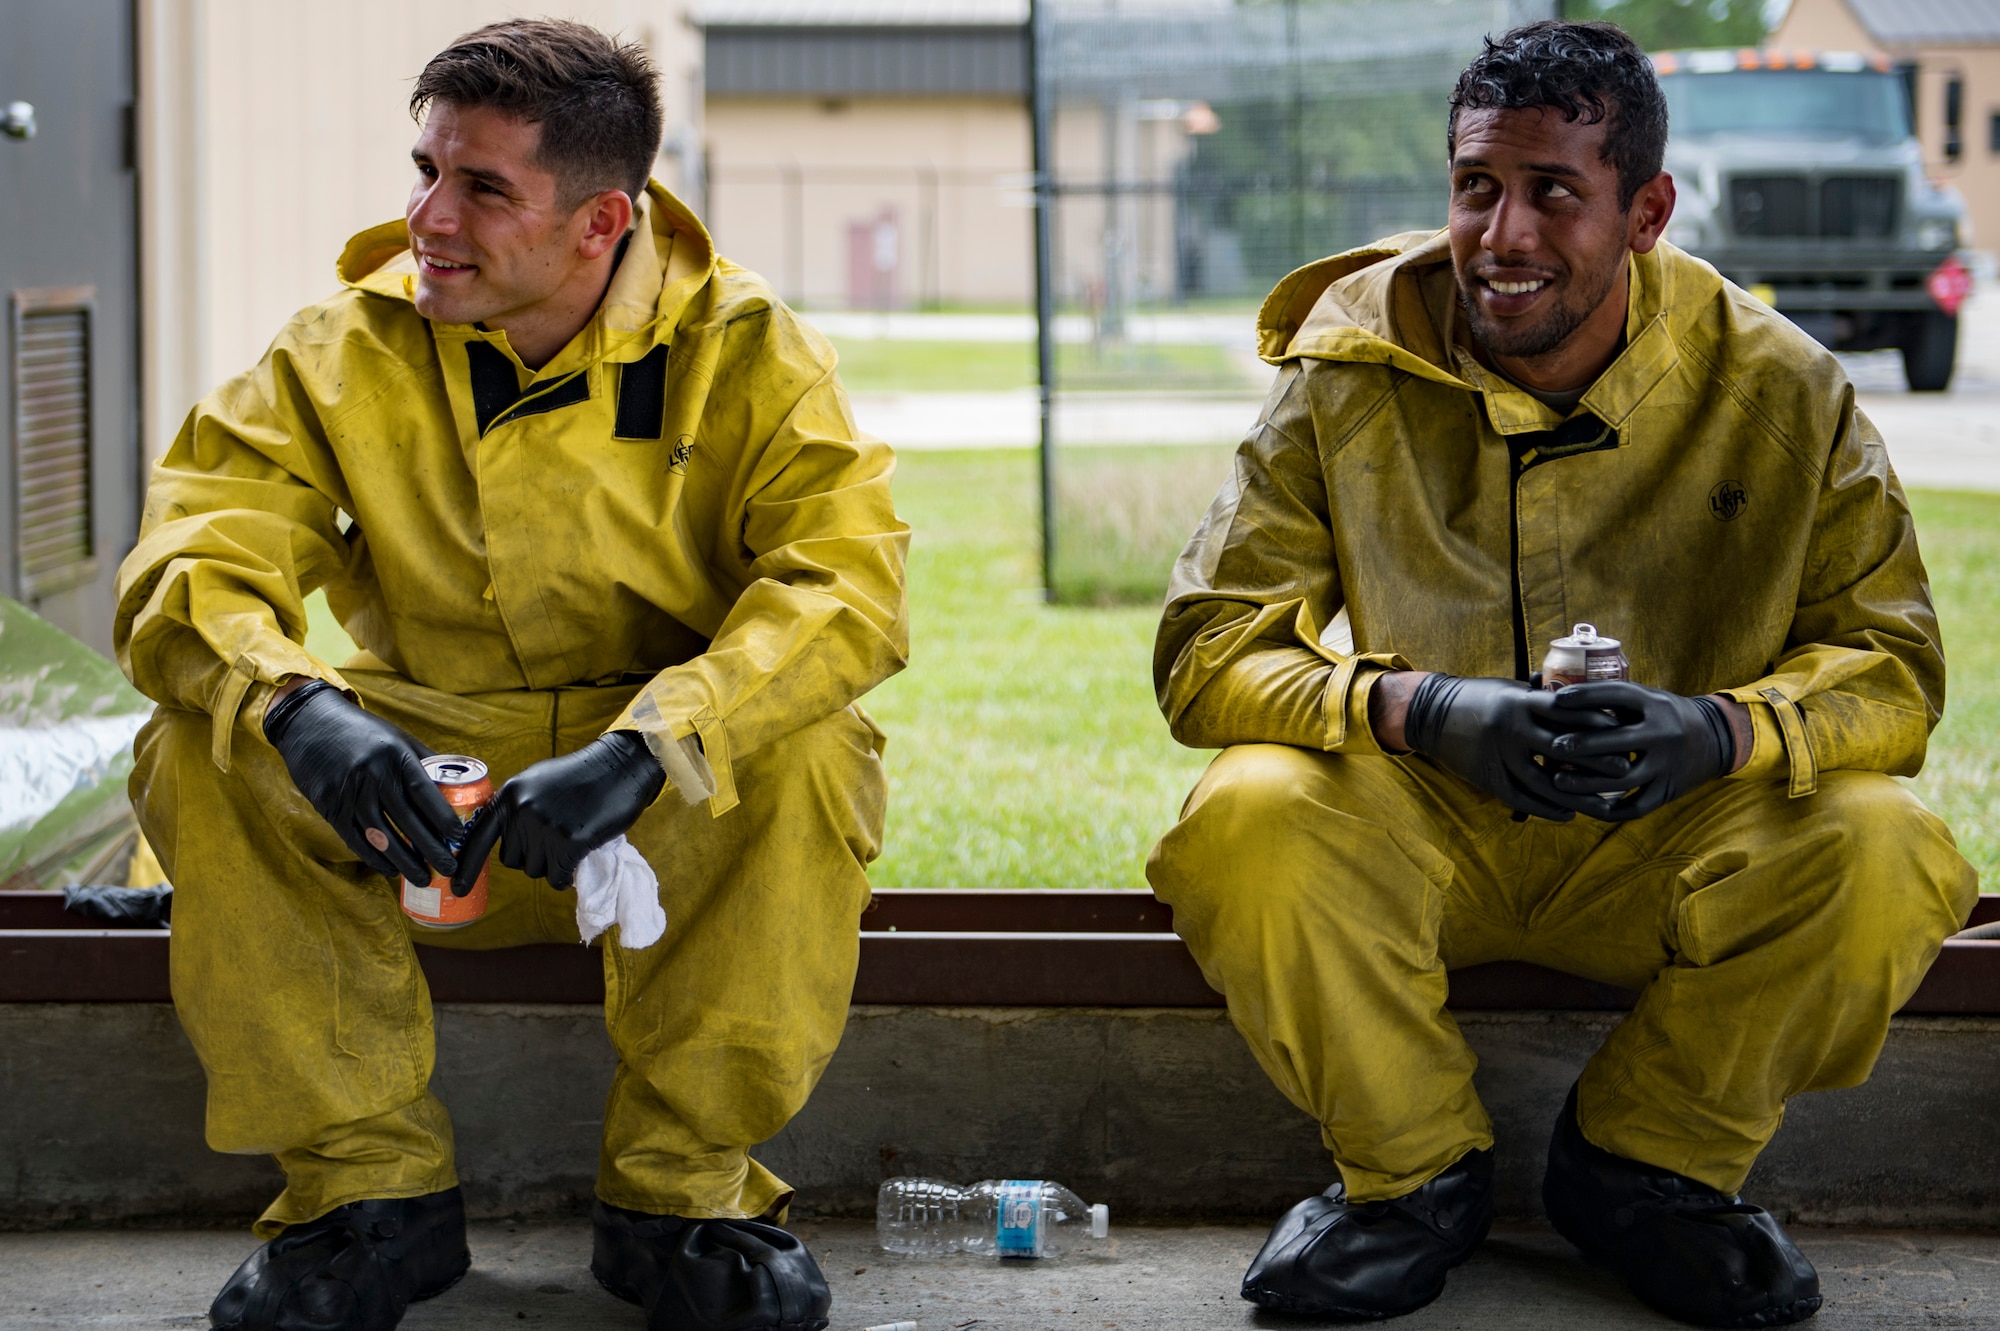 Airman 1st Class Jake Dromgold, left, and Senior Airman Daniel Ioane, both 23d Aircraft Maintenance Squadron crew chiefs, rest for a moment while washing an A-10C Thunderbolt II, Aug. 28, 2017, at Moody Air Force Base, Ga. Maintenance procedures require that A-10s are washed at least every 180 days to prevent maintenance issues and safety hazards to the pilot. Since strong chemicals are used to clean the aircraft Airmen must wear personal protective equipment. (U.S. Air Force photo by Airman 1st Class Daniel Snider)